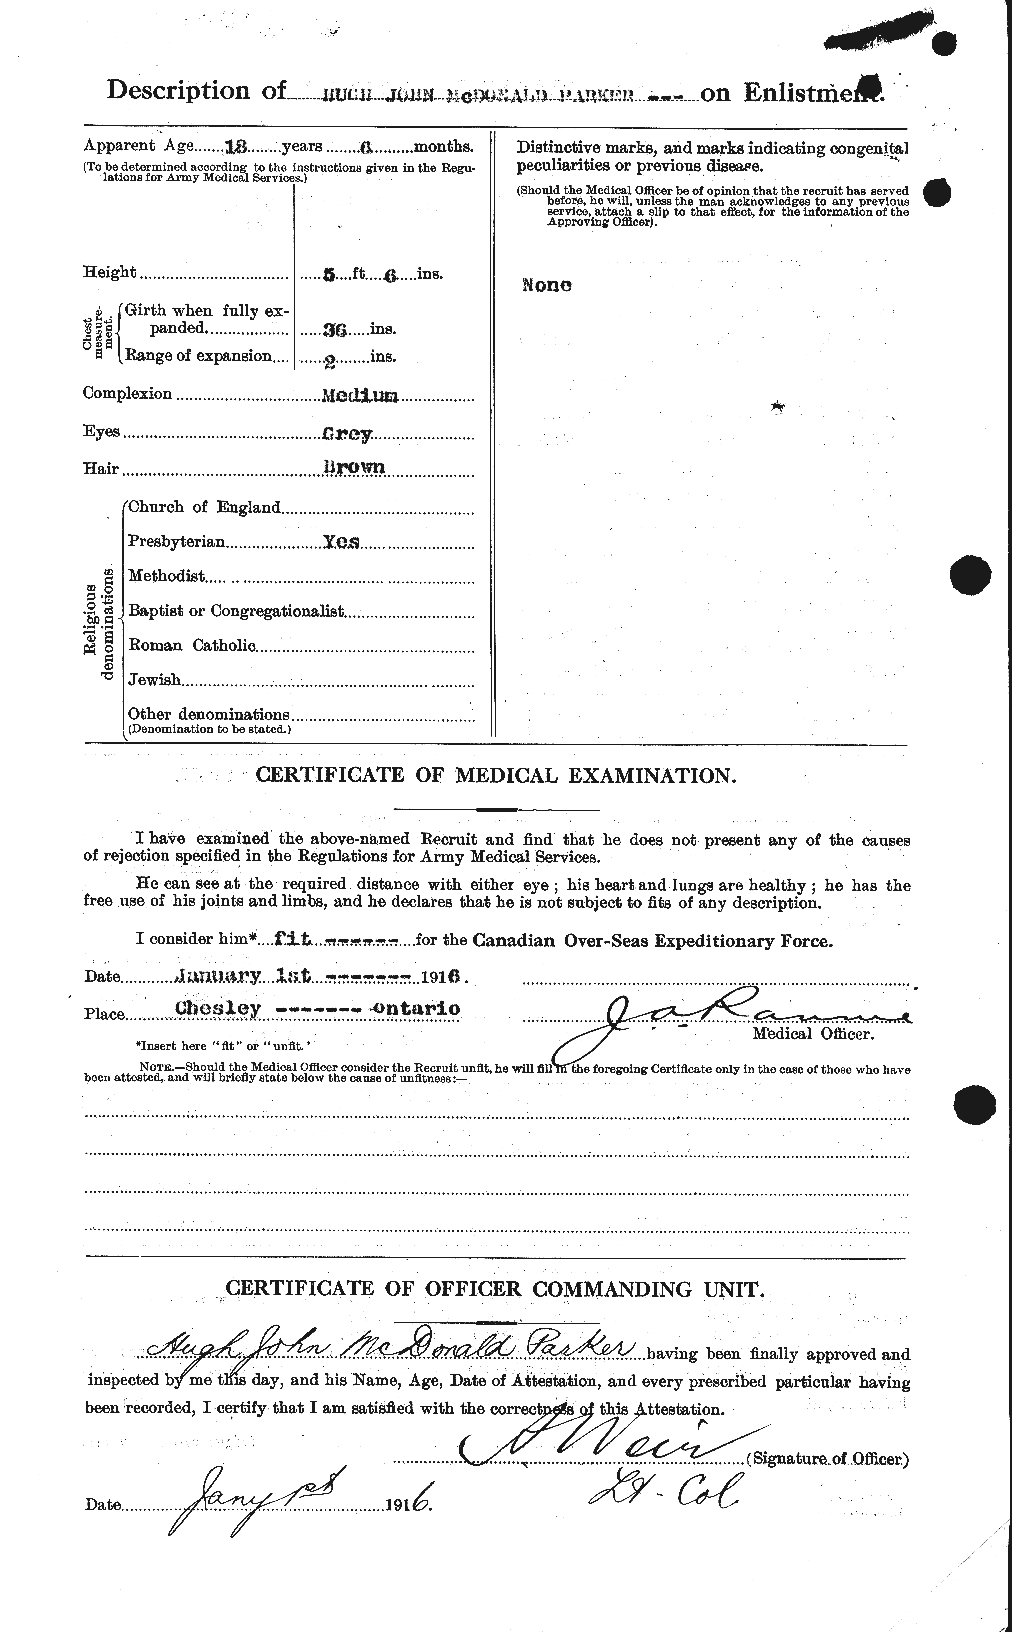 Personnel Records of the First World War - CEF 565399b